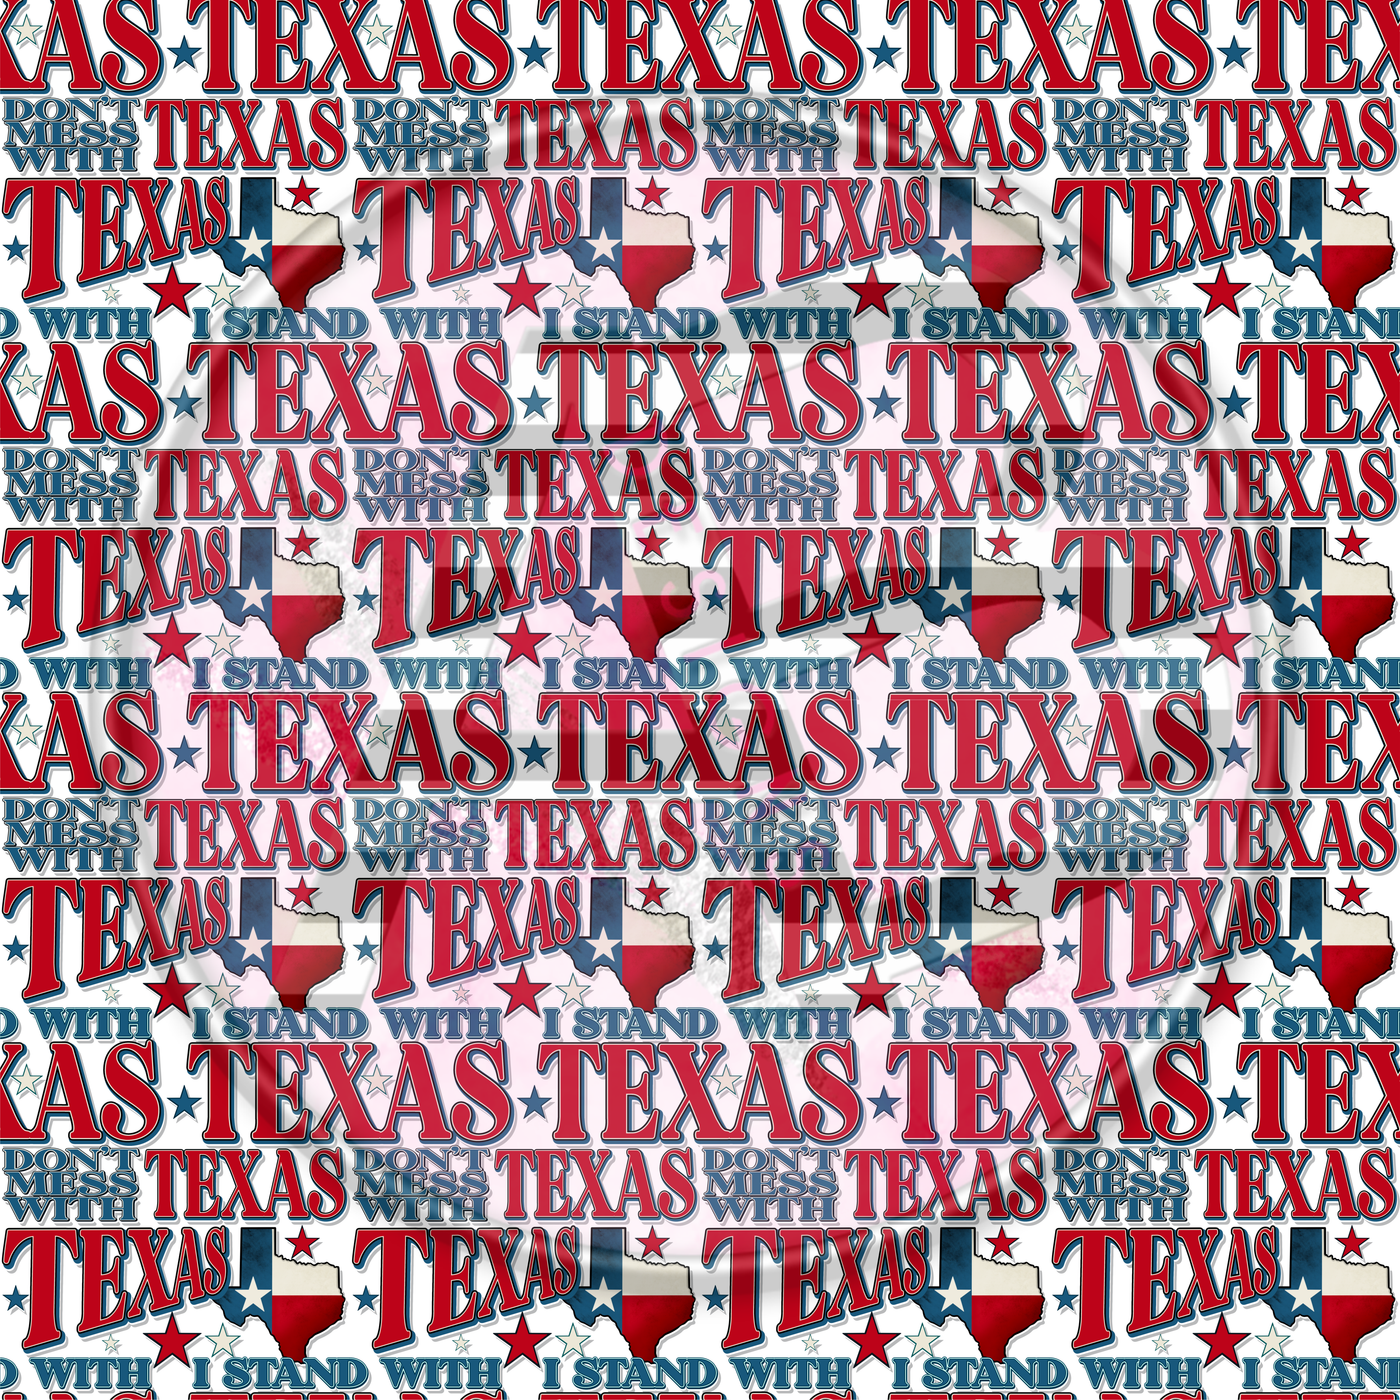 Adhesive Patterned Vinyl - Texas 01 SMALLER